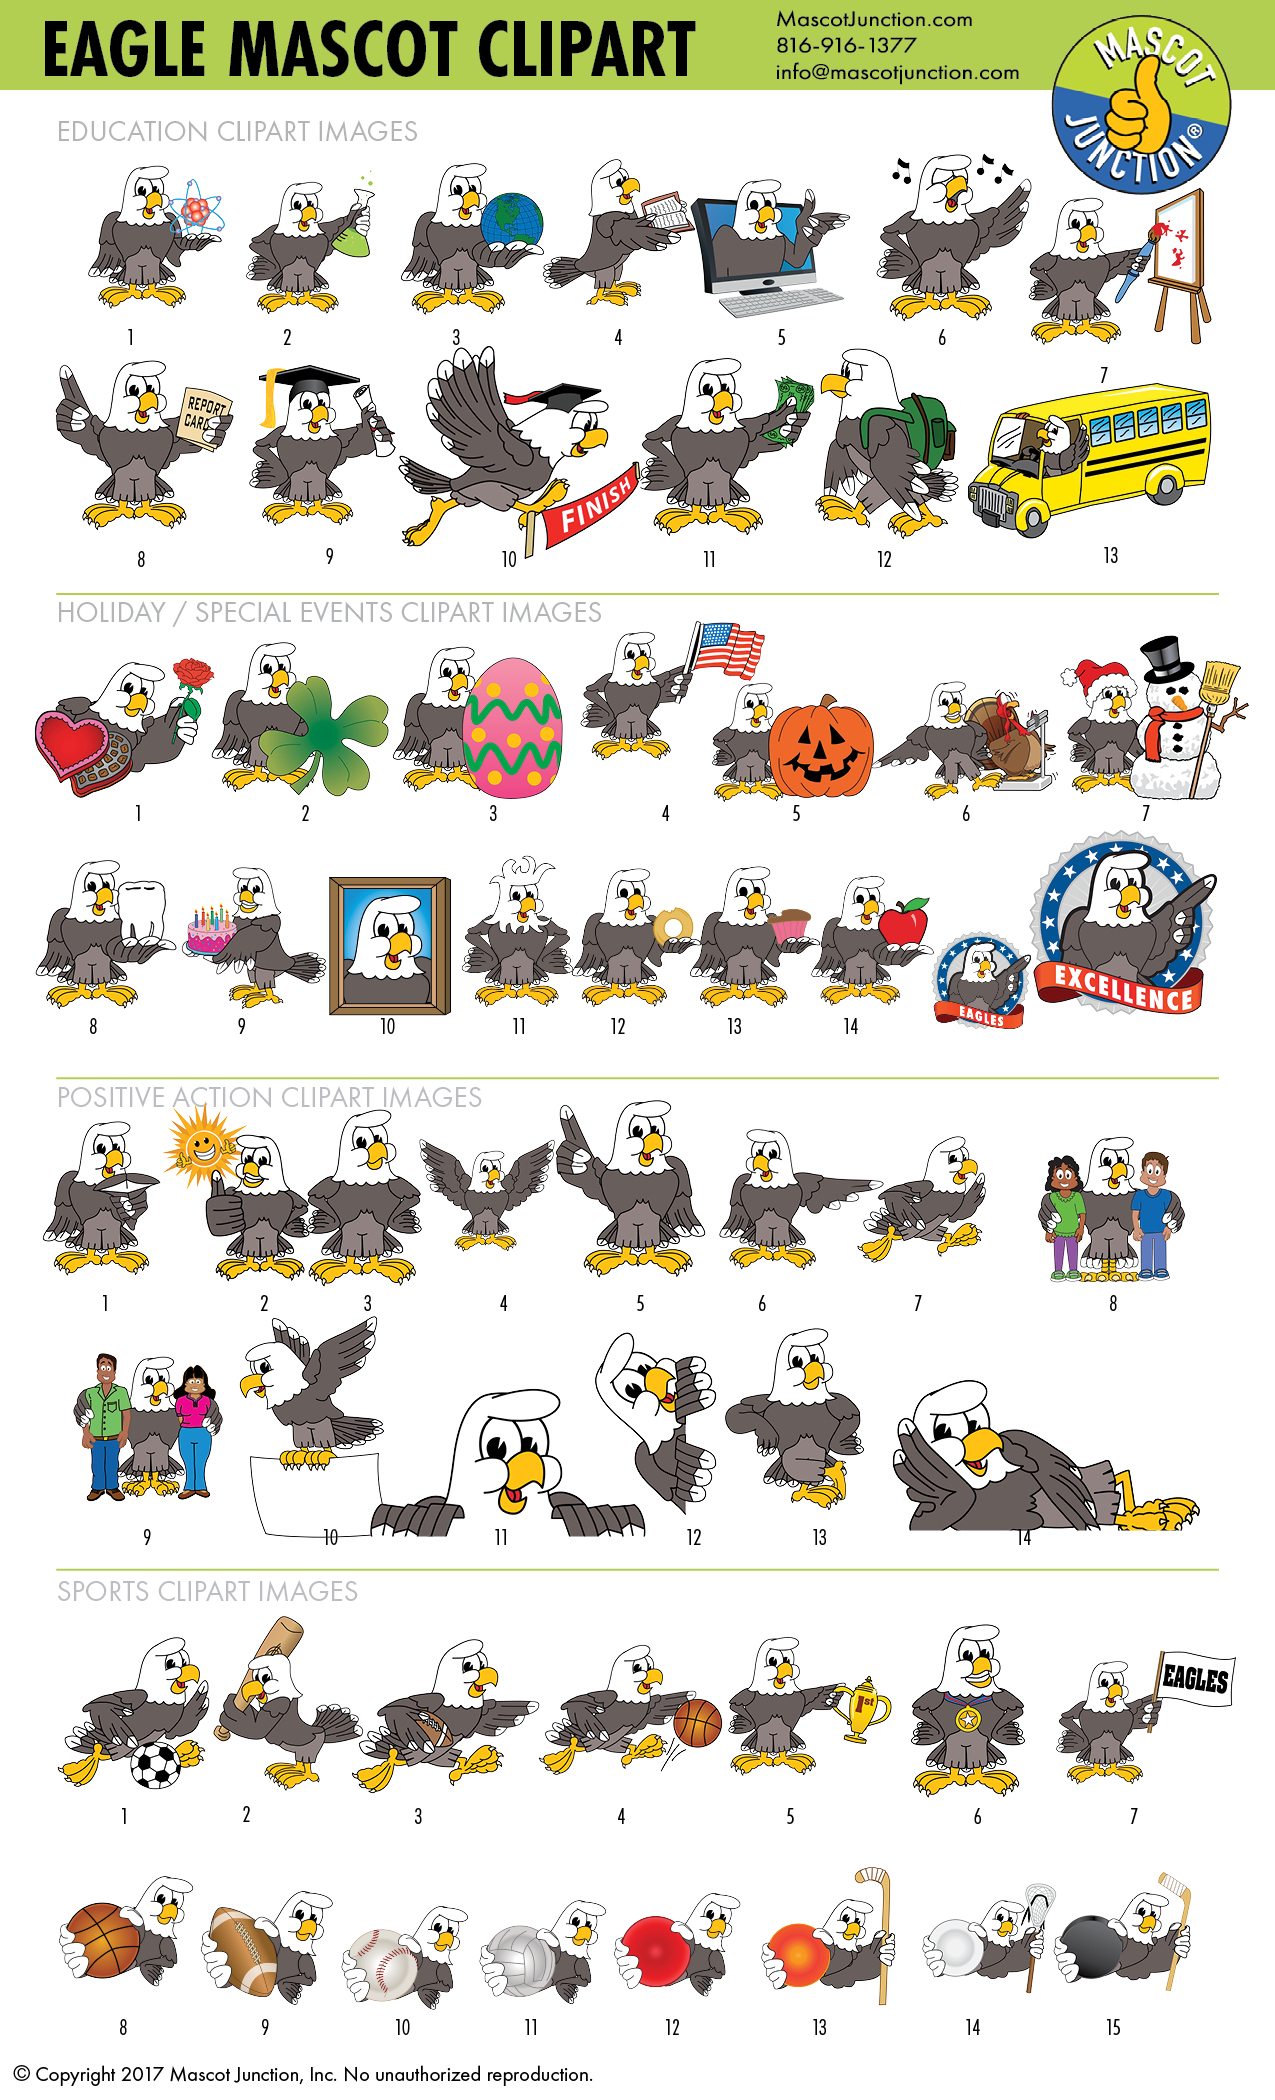 Eagle Mascot Clipart Set by Mascot Junction